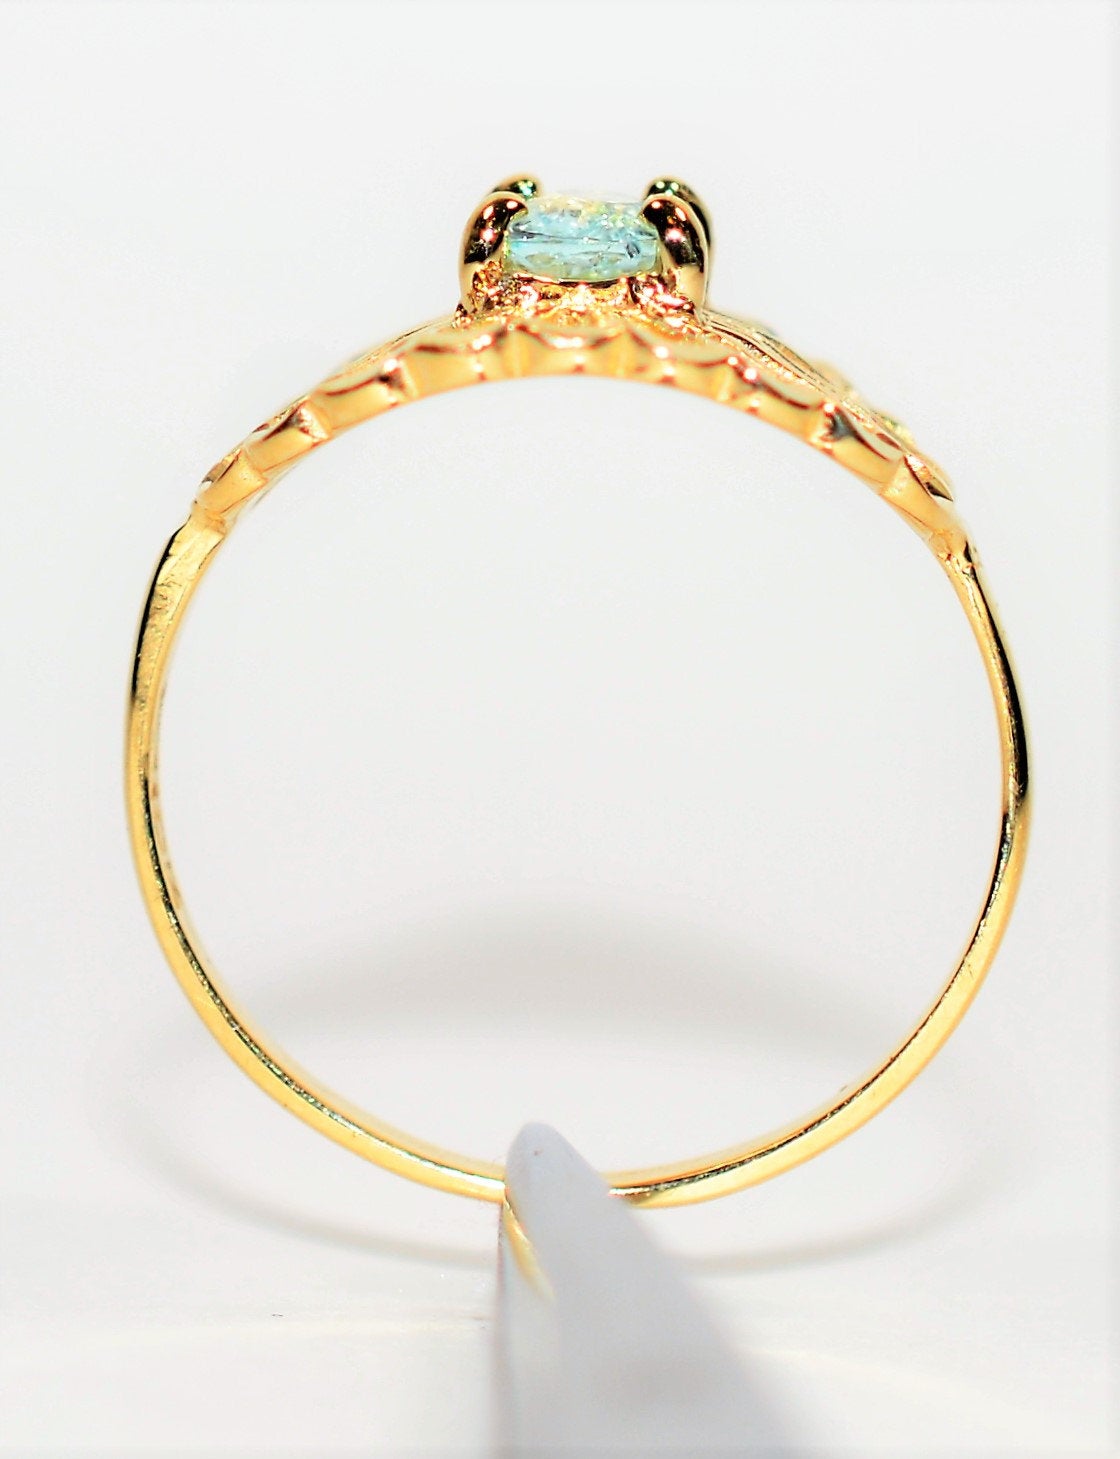 Natural Paraiba Tourmaline Ring 10K Solid Gold .38ct Solitaire Gemstone Saucer Ring Ballerina Ring Women's Ring Birthstone Jewelry Jewellery